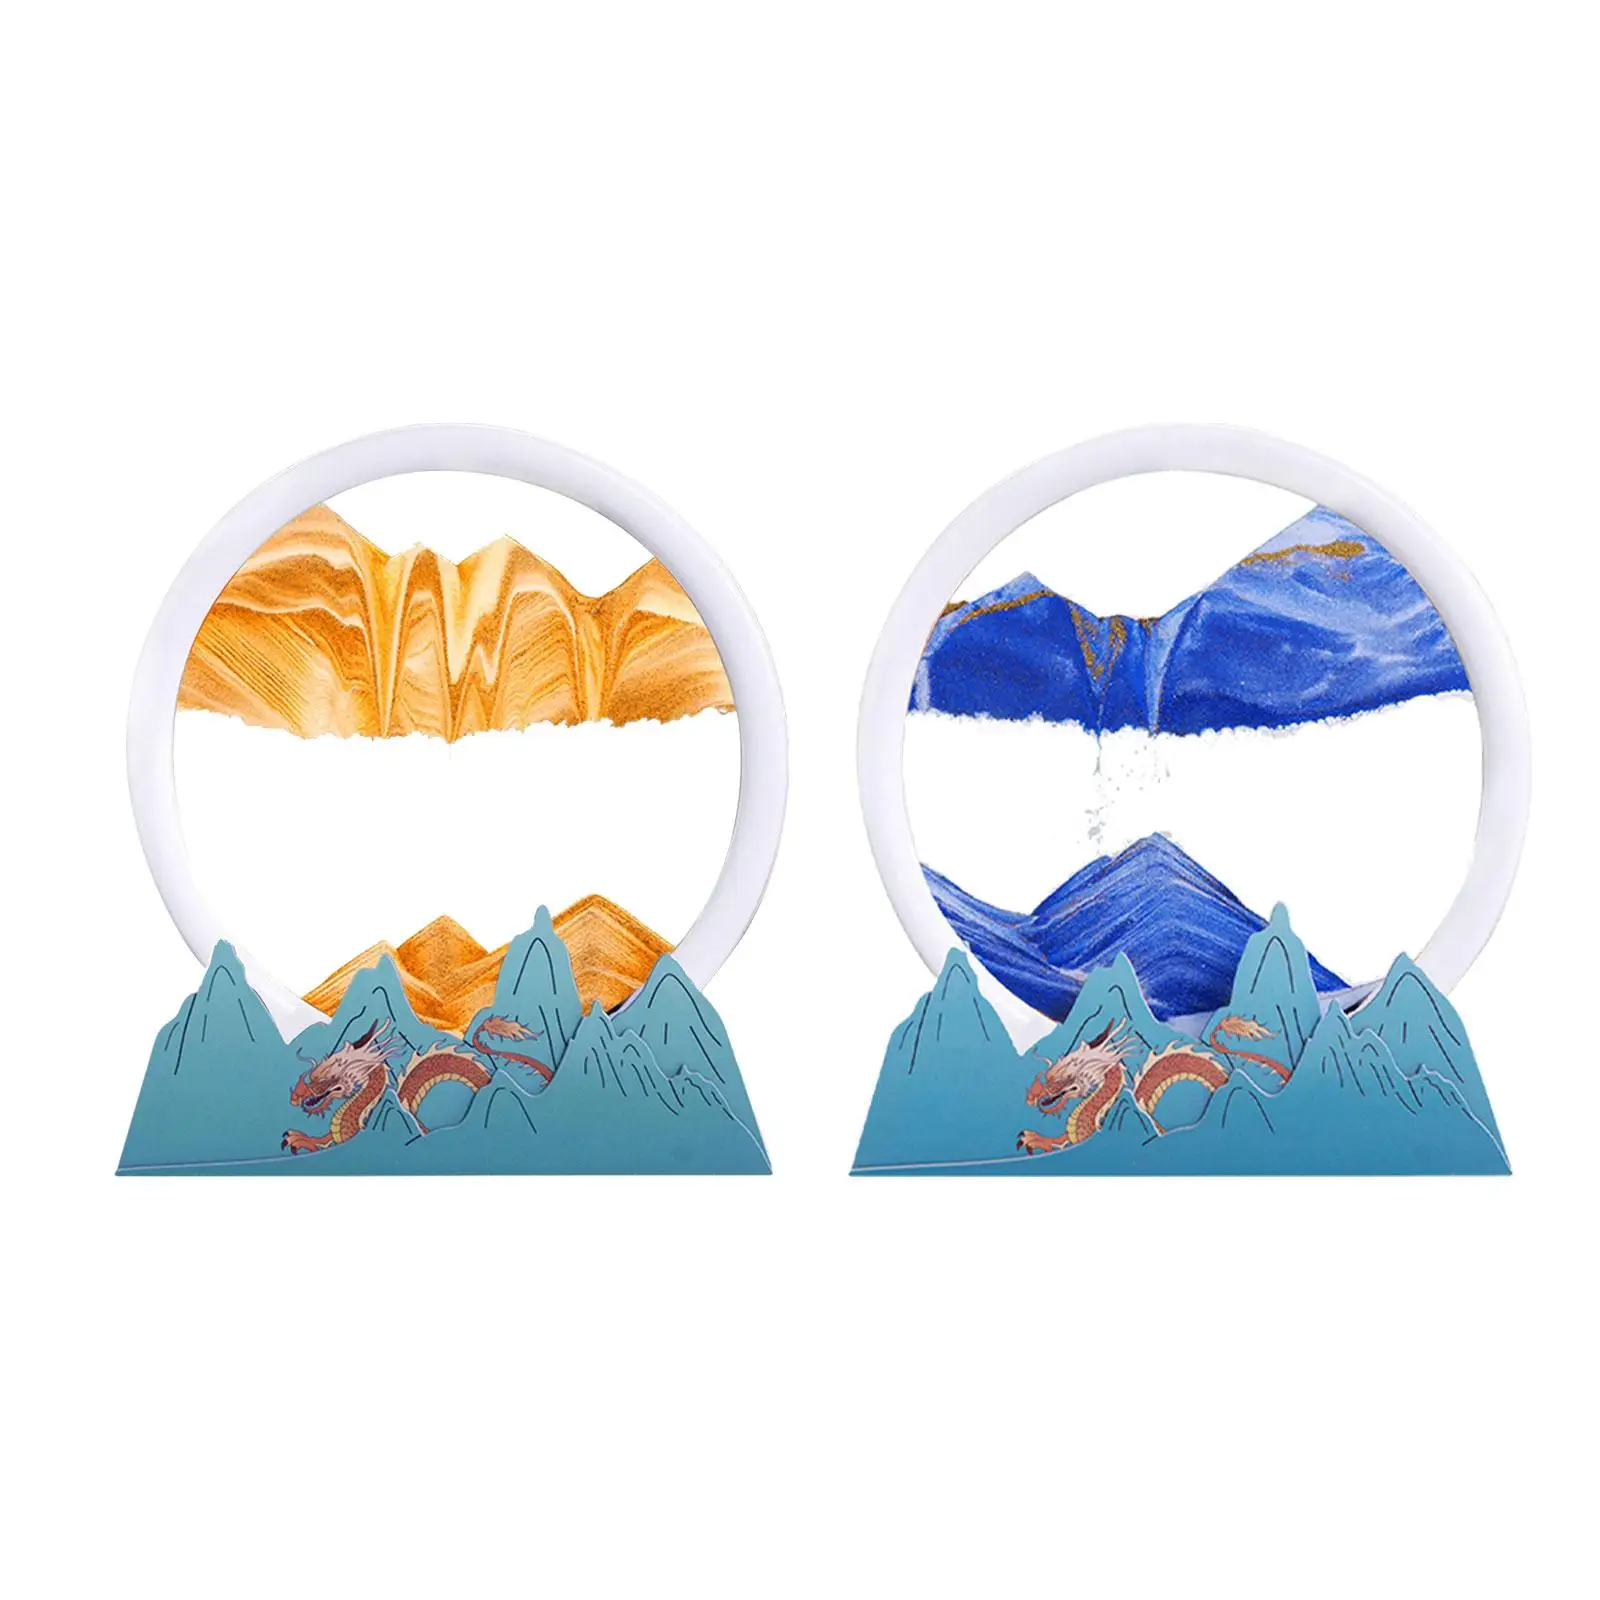 

3D Moving Sand Art Picture Decor Toy Round Glass Landscape Flowing Sand Painting for Bookshelves Bar Office Water Desk Bedroom